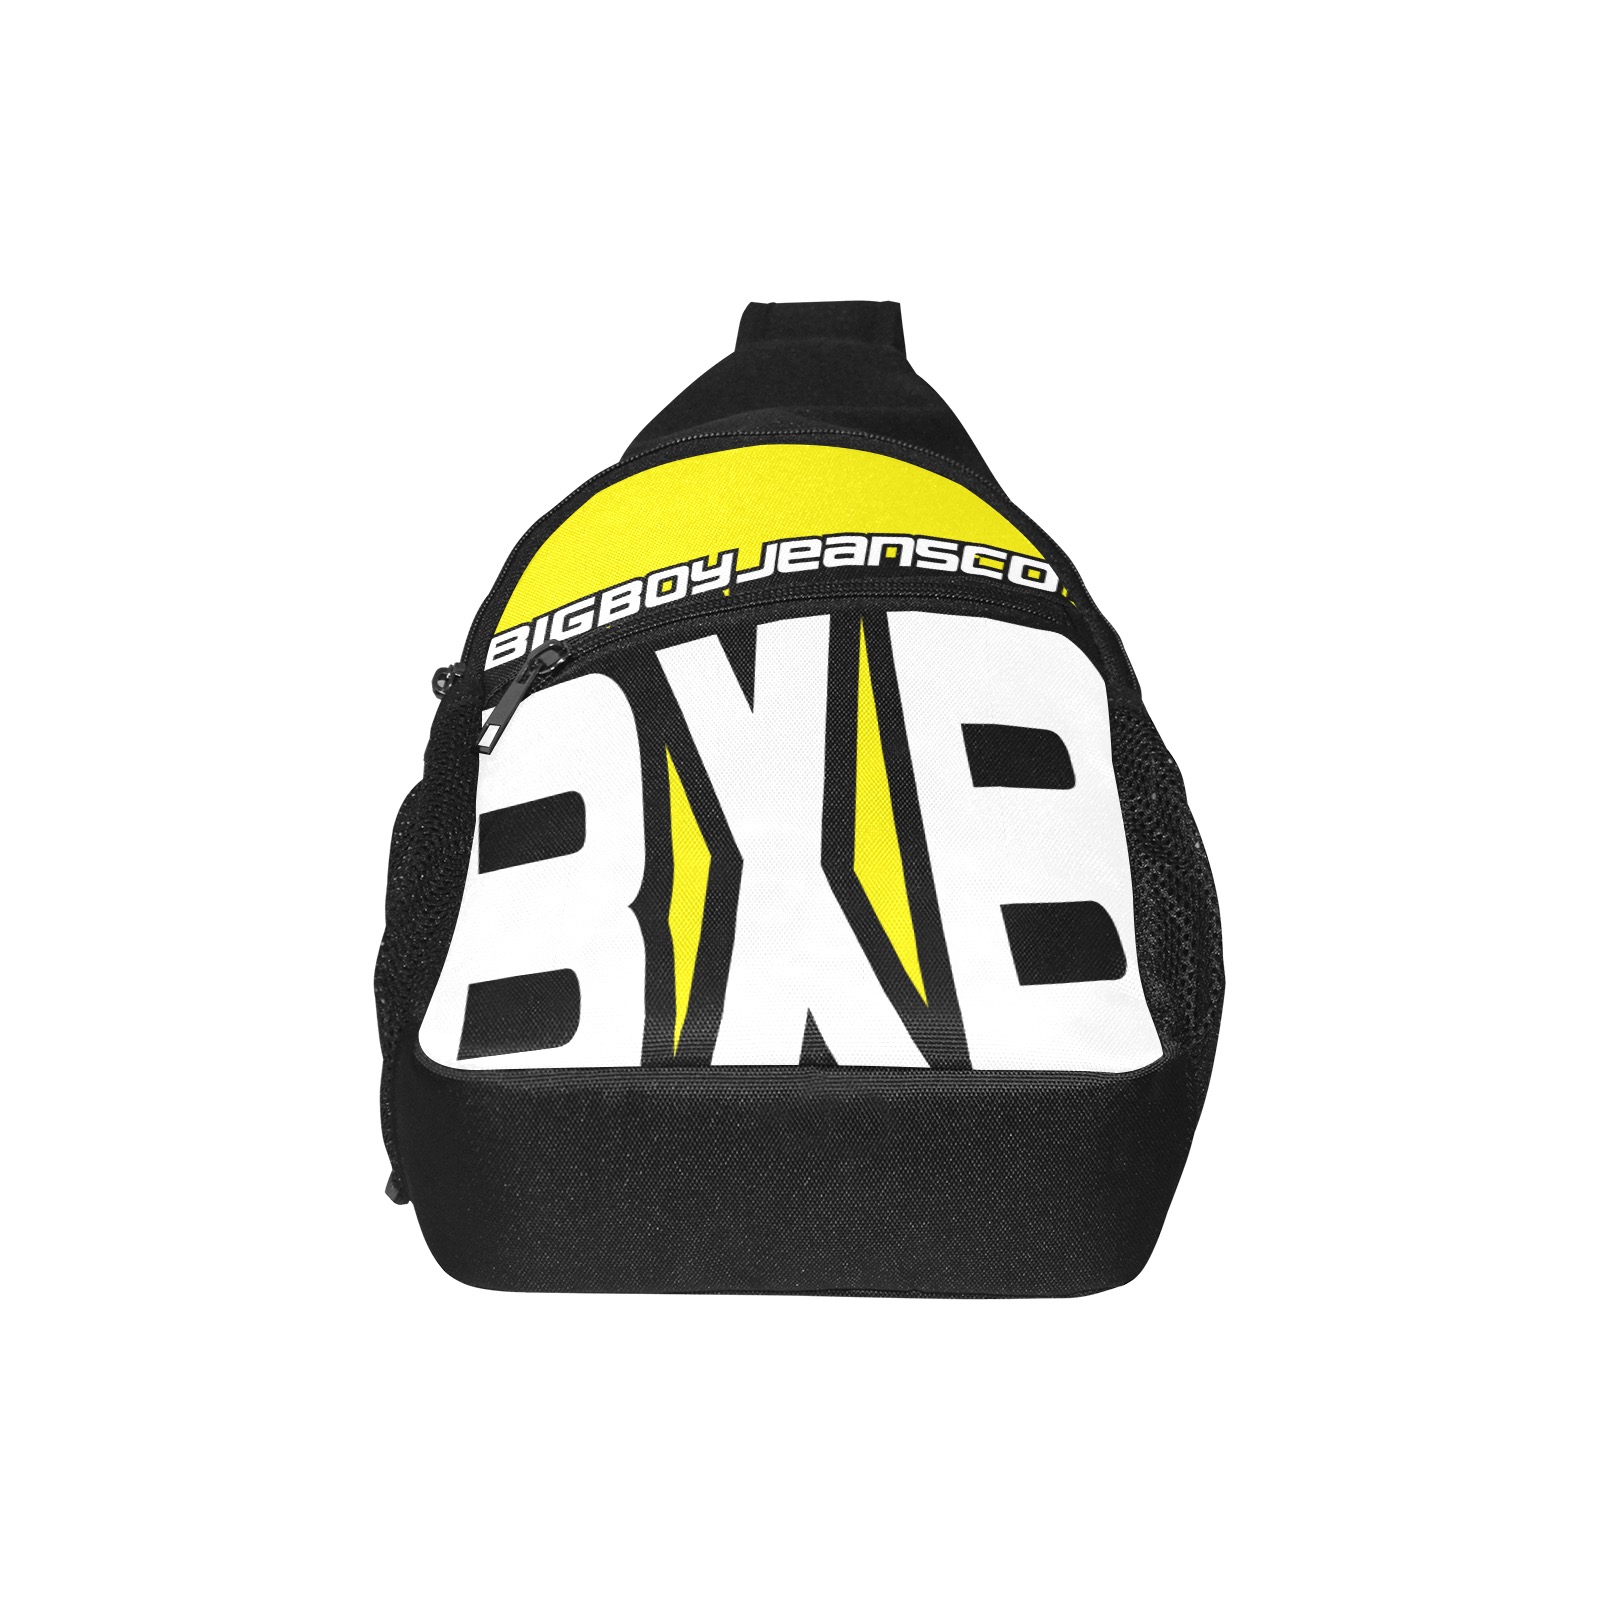 BXB BAG YELLOW Chest Bag-Front Printing (Model 1719)